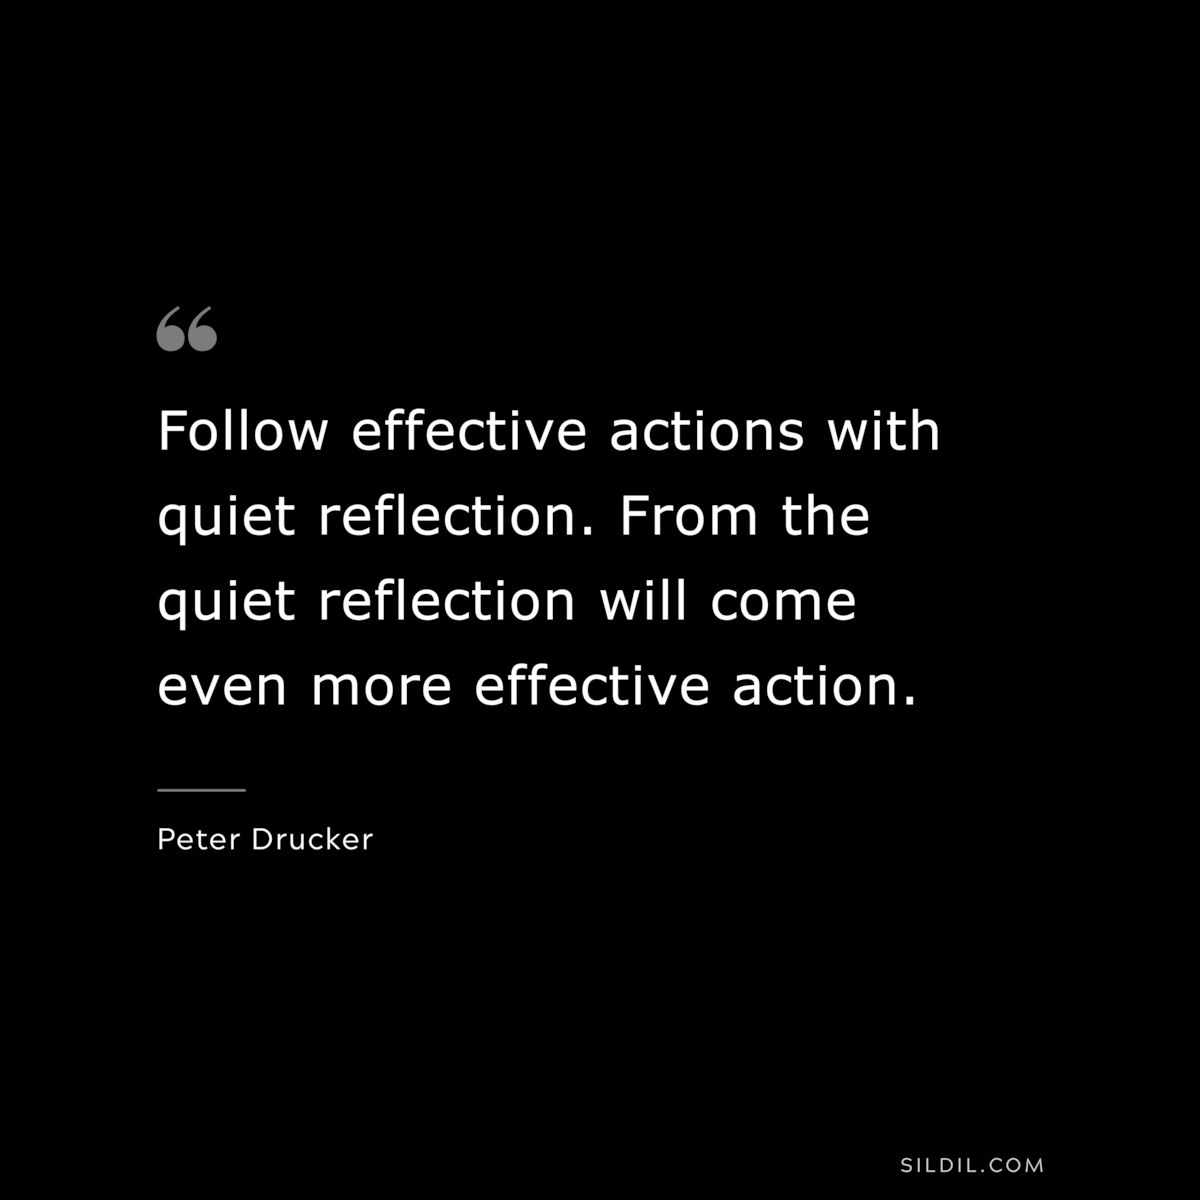 Follow effective actions with quiet reflection. From the quiet reflection will come even more effective action. ― Peter Drucker